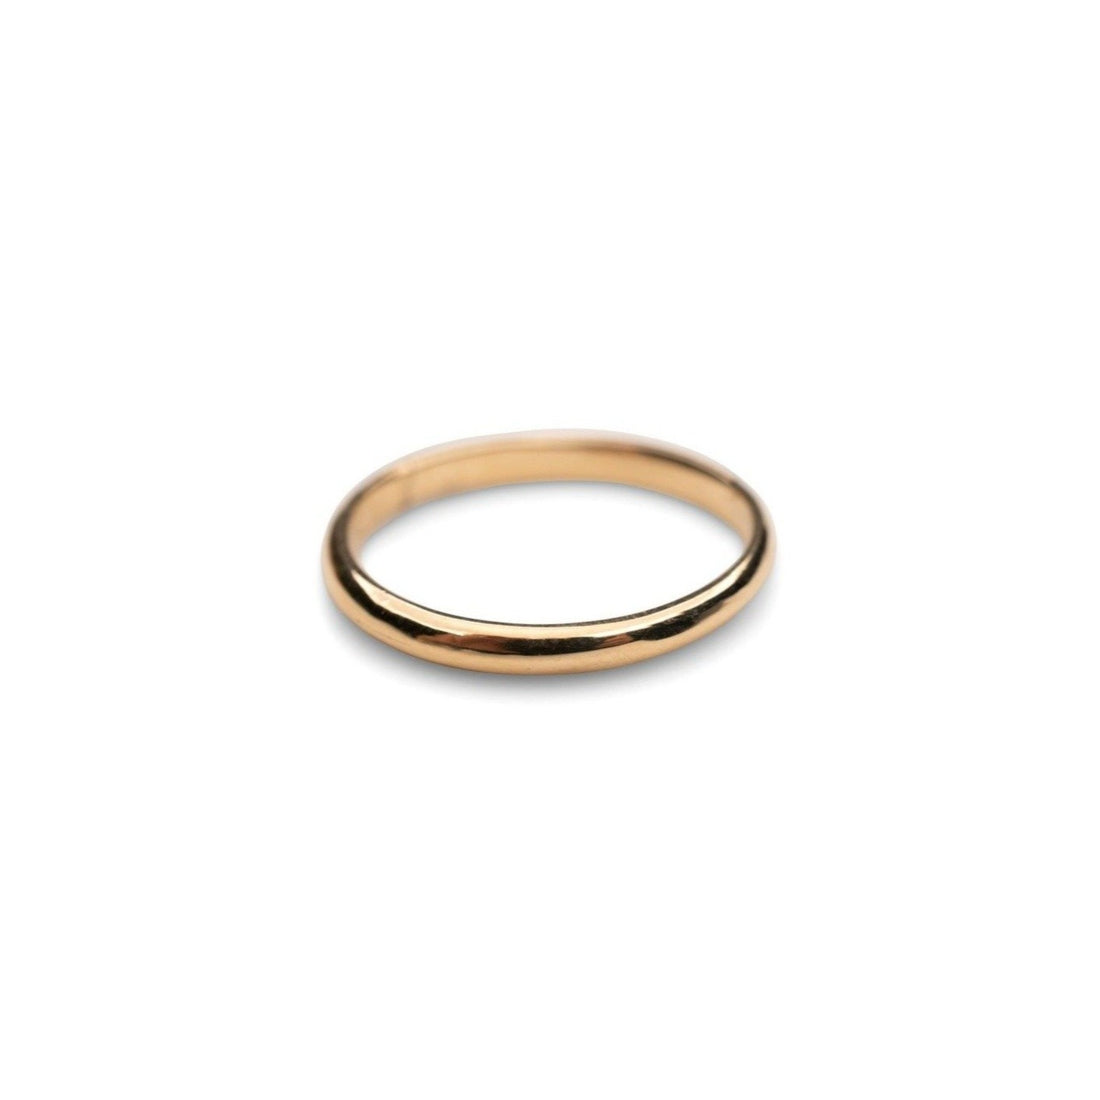 14k 2mm Band Ring